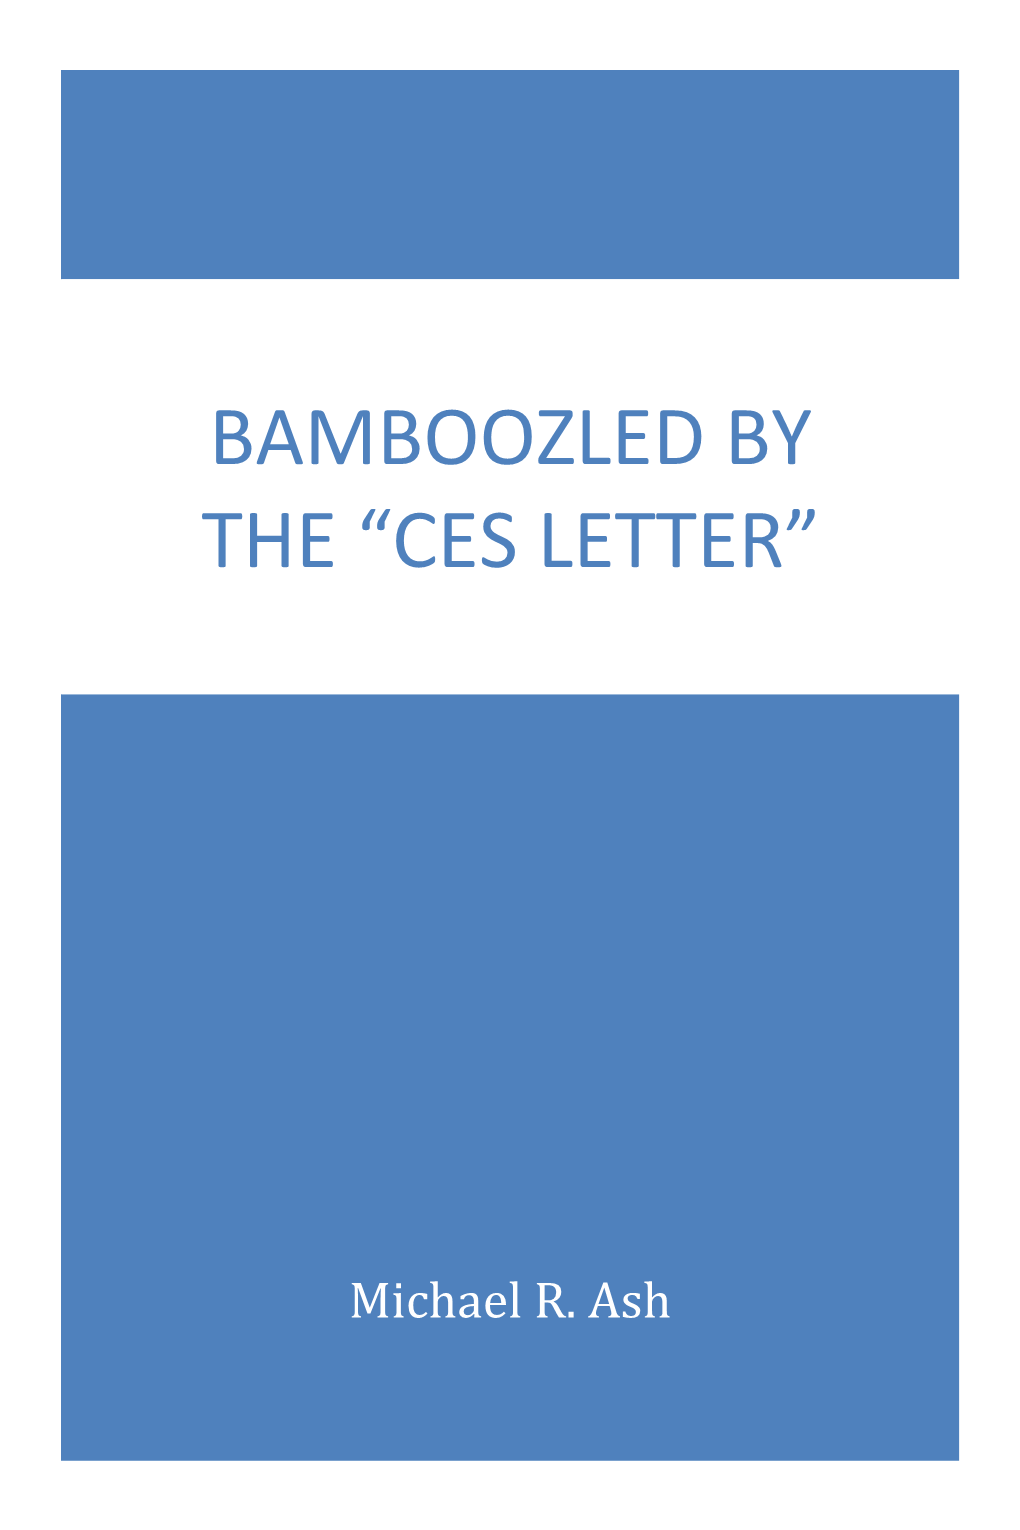 Bamboozled by the “Ces Letter”